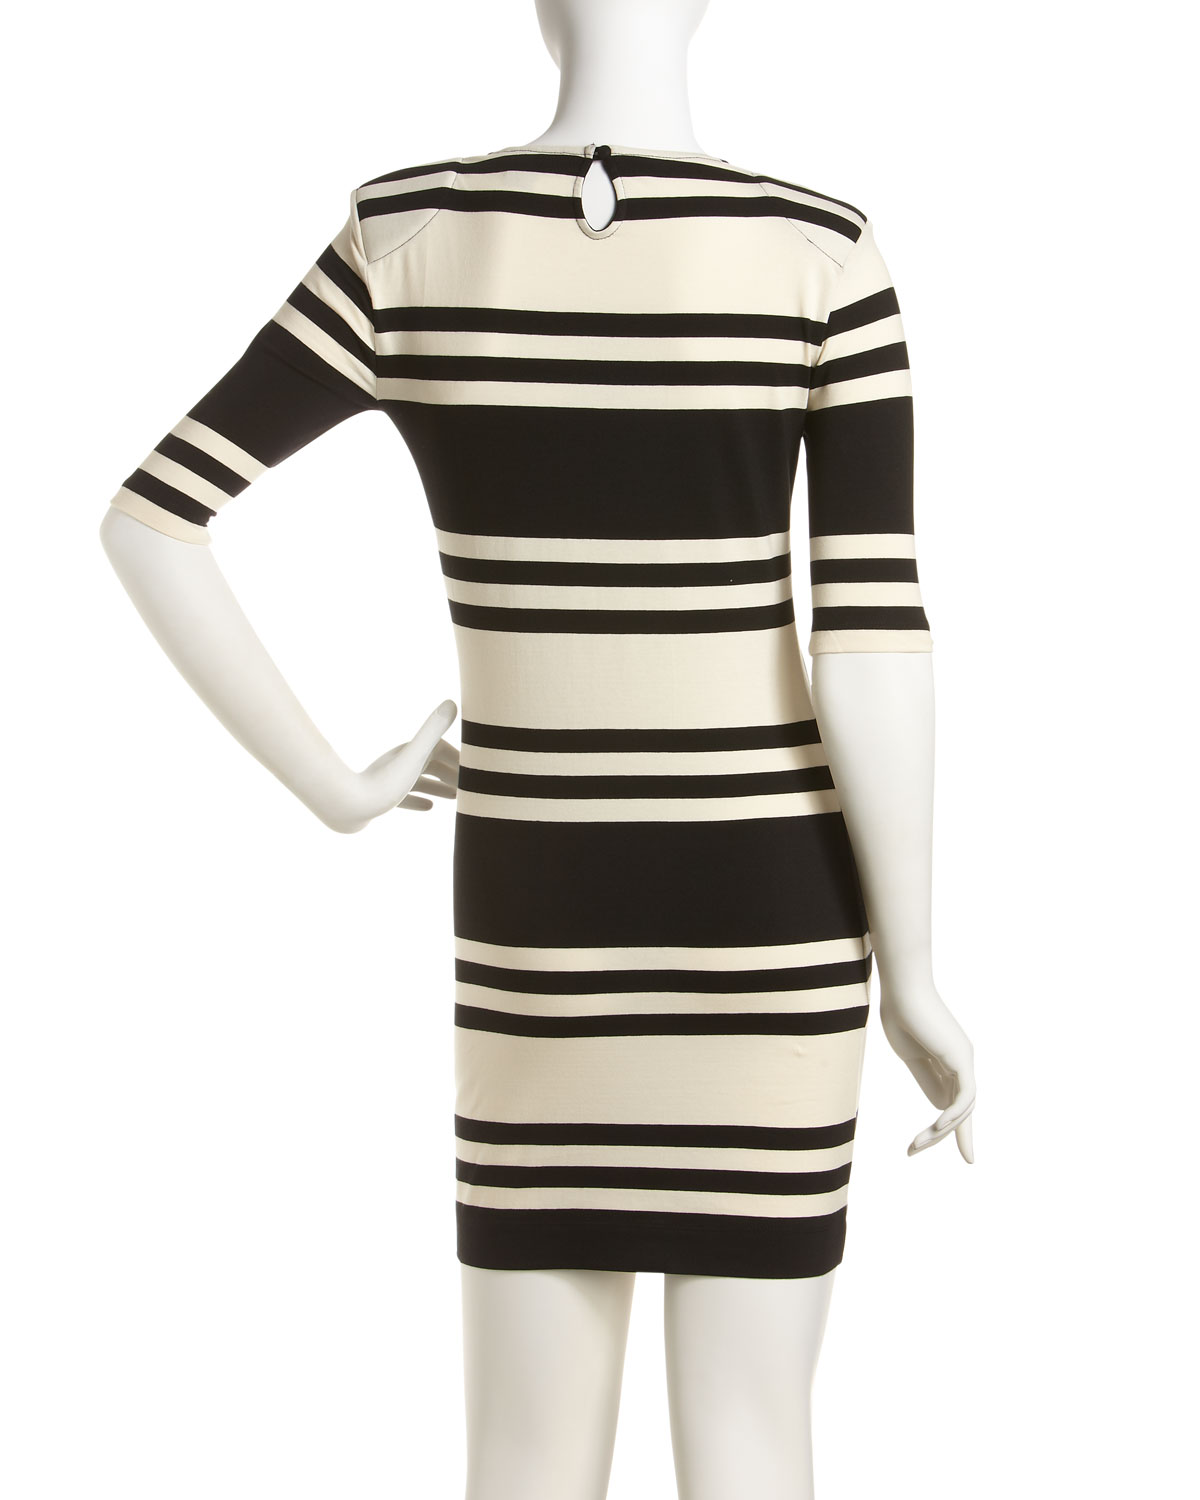 Lyst - French Connection Jag Striped Knit Dress in Black